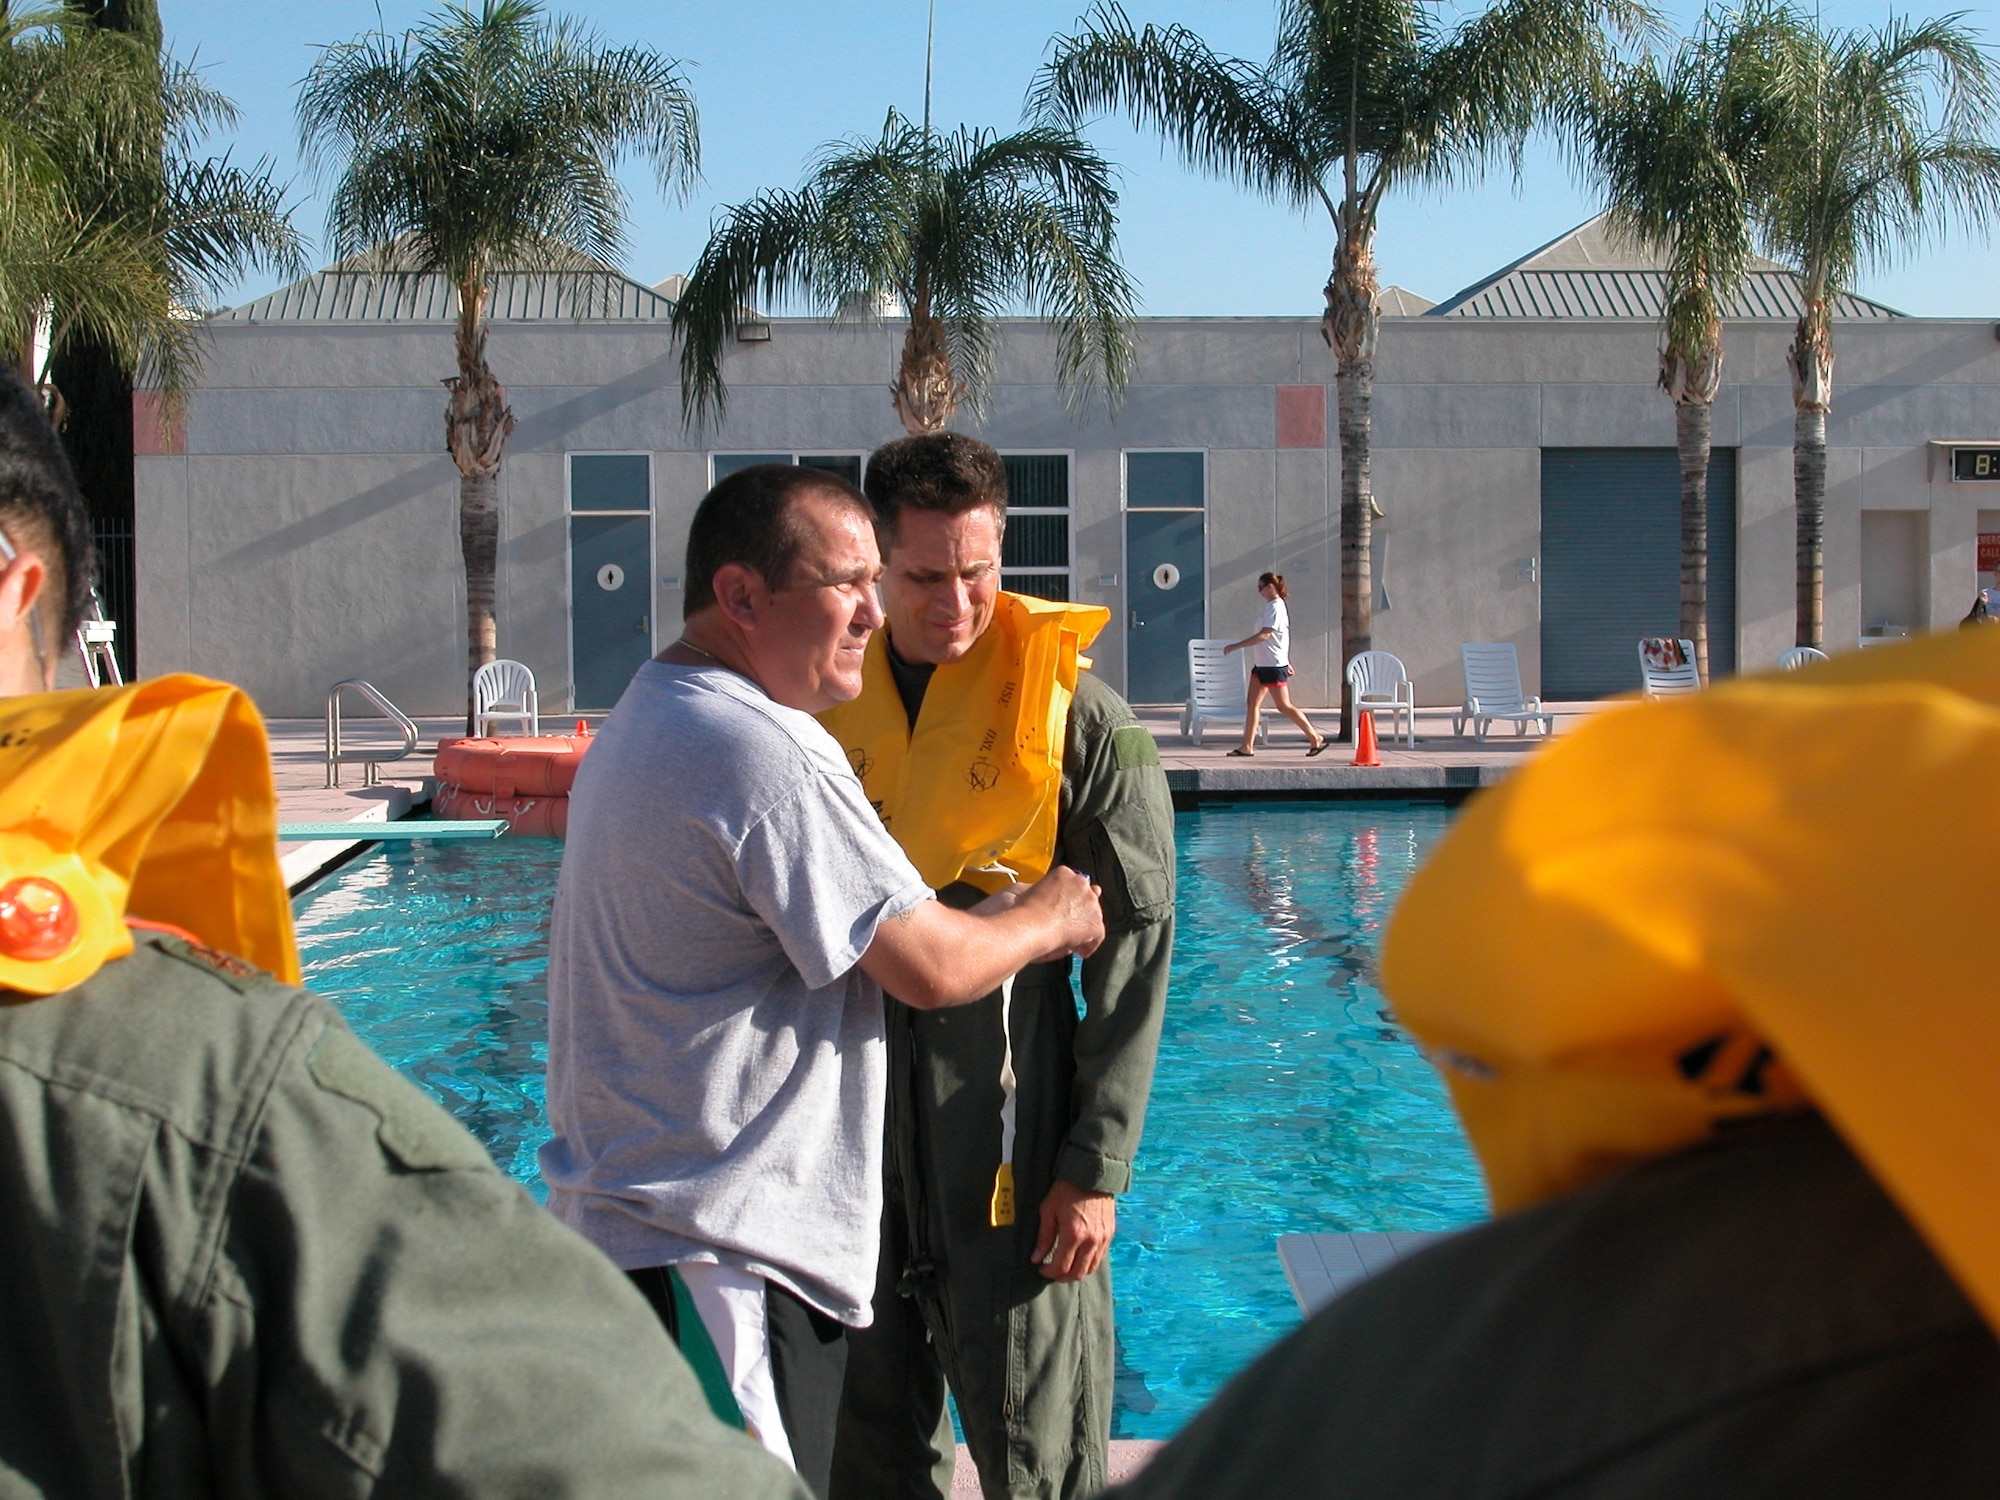 Tech. Sgt. Lawrence E. Hill, demonstrates to students how to adjust the Adult/Child Life Preservers with Lt. Col. Charles Assuma, commander, 452 OSS. (U.S. Air Force photo by Staff Sgt. Joe Davidson, 452 AMW/PA)